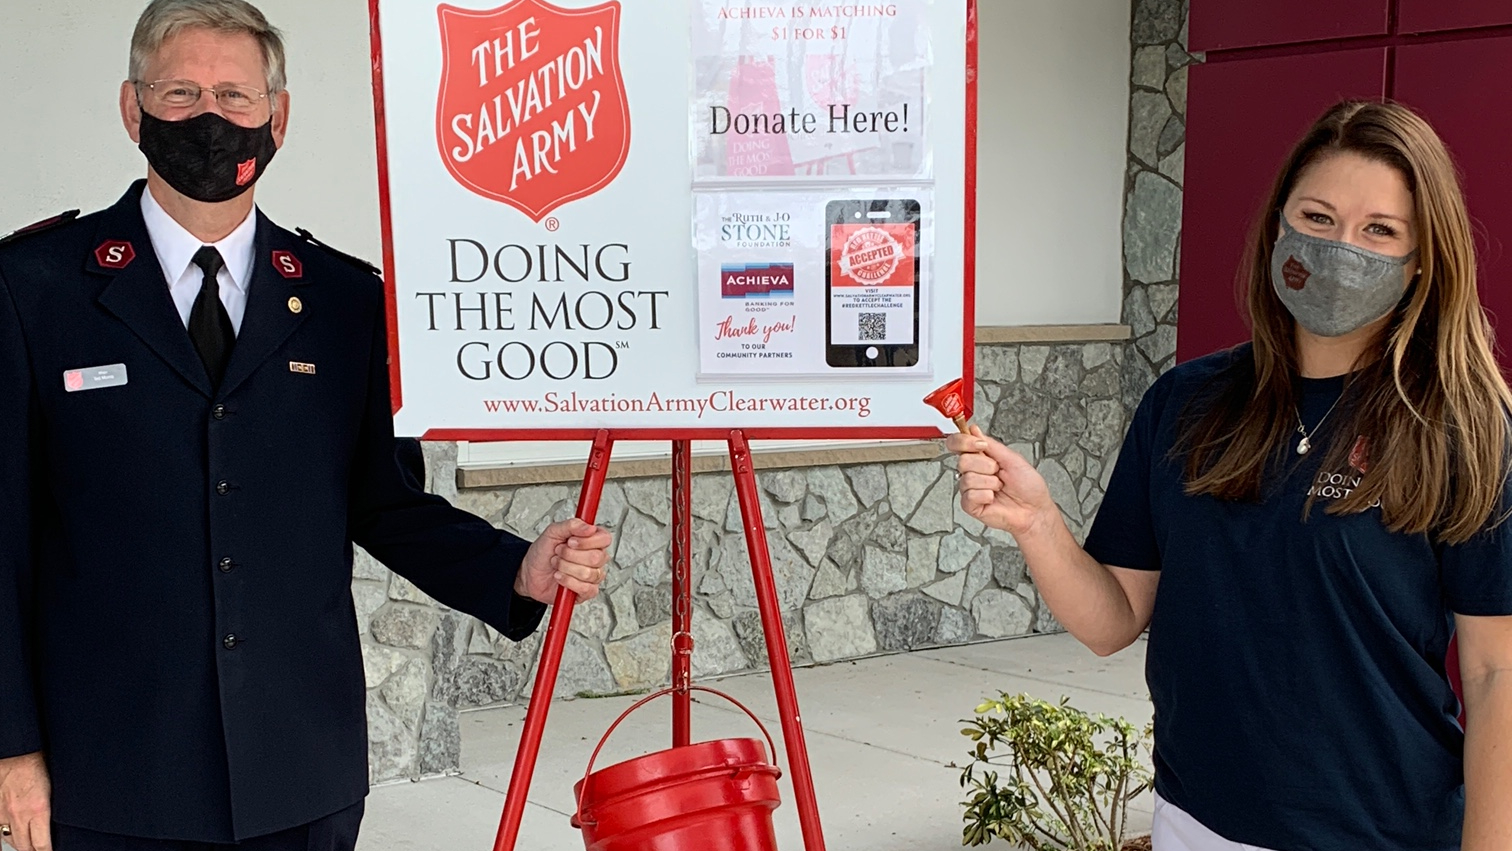 Weekend anchor Erin Murray was a bell ringer for the Salvation Army Red Kettle campaign sponsored by Achieva.  She was at the Achieva location in Palm Harbor.